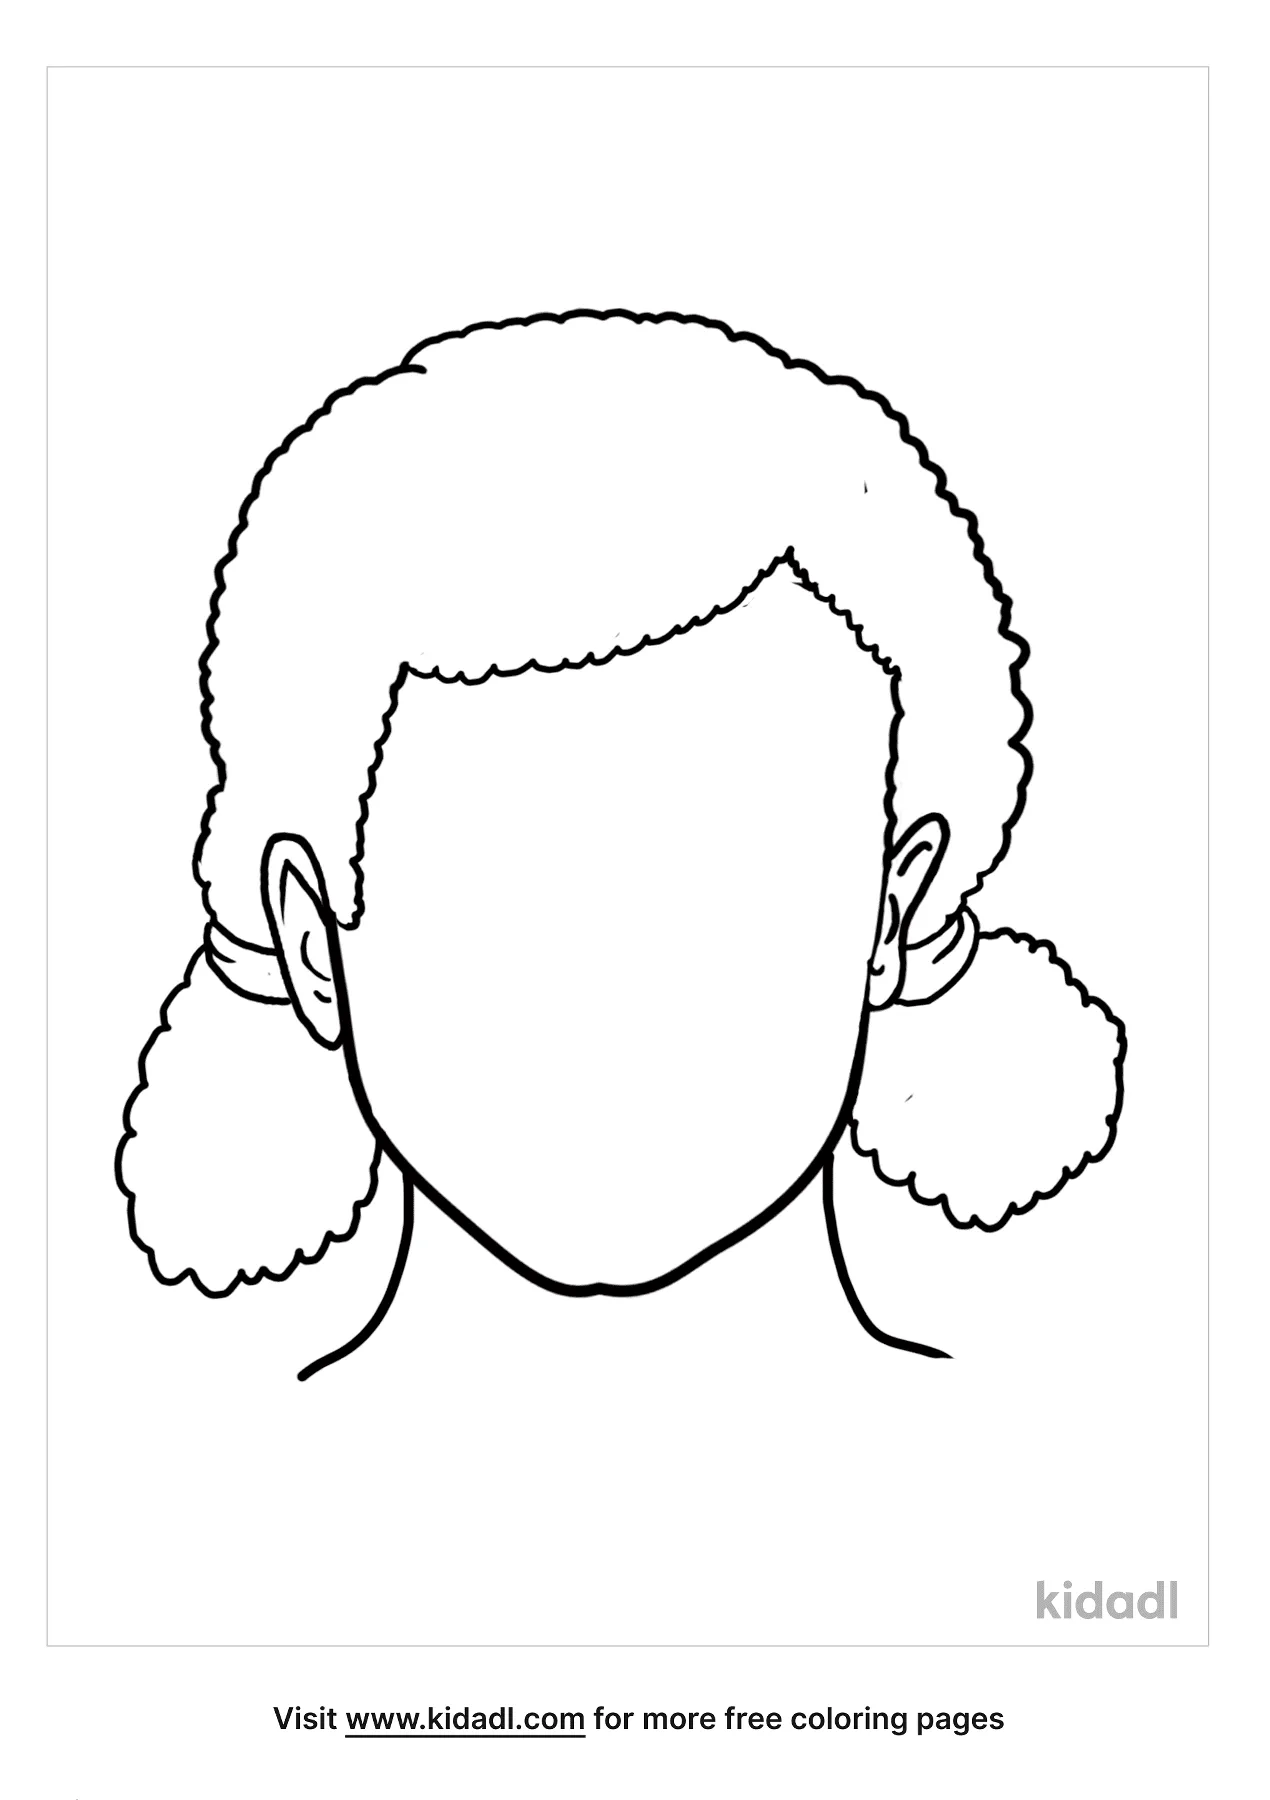 Blank Face Coloring Pages  Free People Coloring Pages  Kidadl Regarding Blank Face Template Preschool